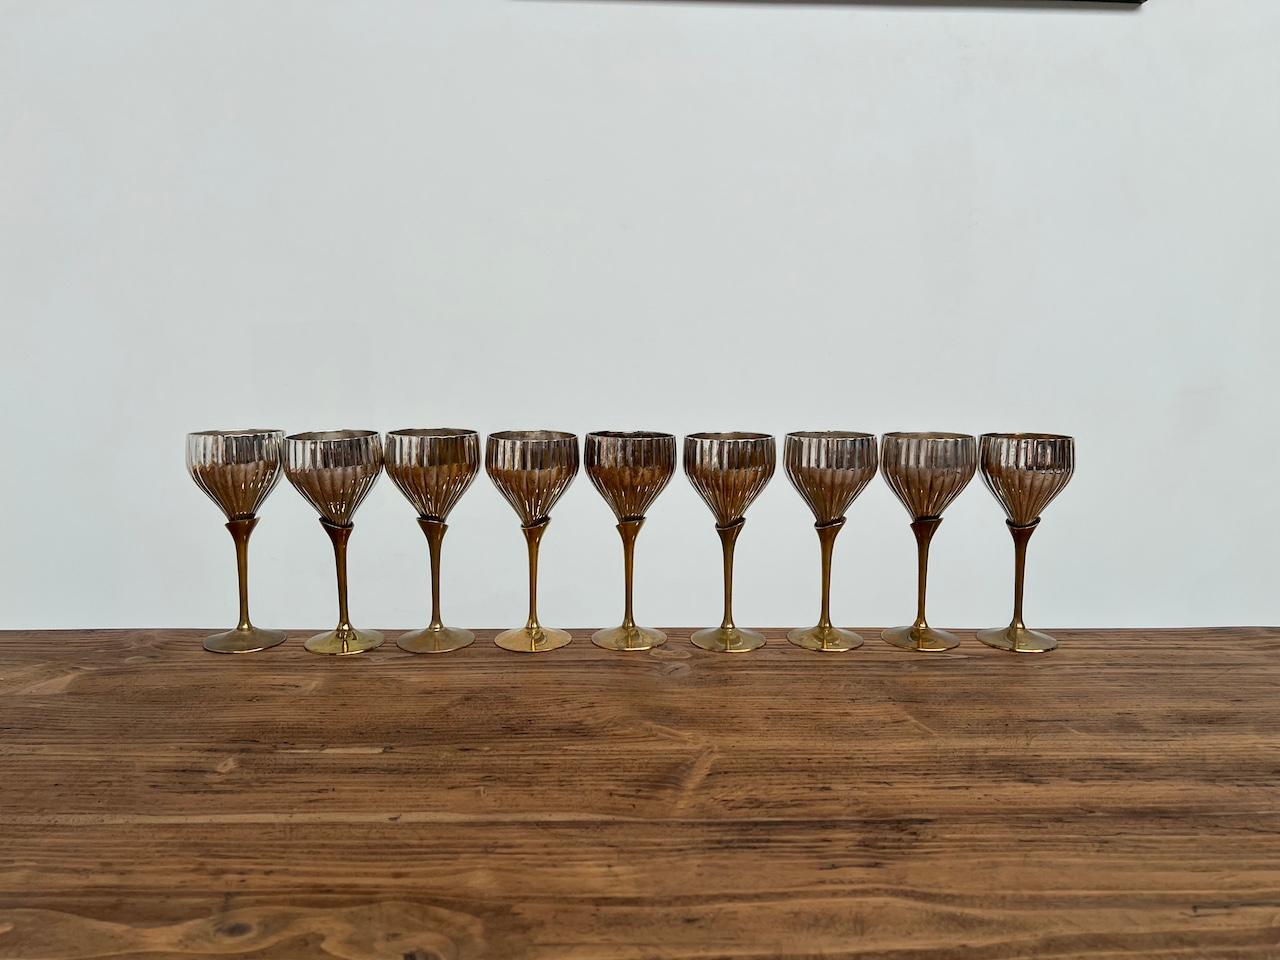 Series of 9 glasses from the 1950s in silver metal and brass

These glasses from the 50s have a very beautiful original patina and can be used as decoration or for drinking!

Highly decorative on a table. A favorite

Height 19 cm X Depth: 8 cm